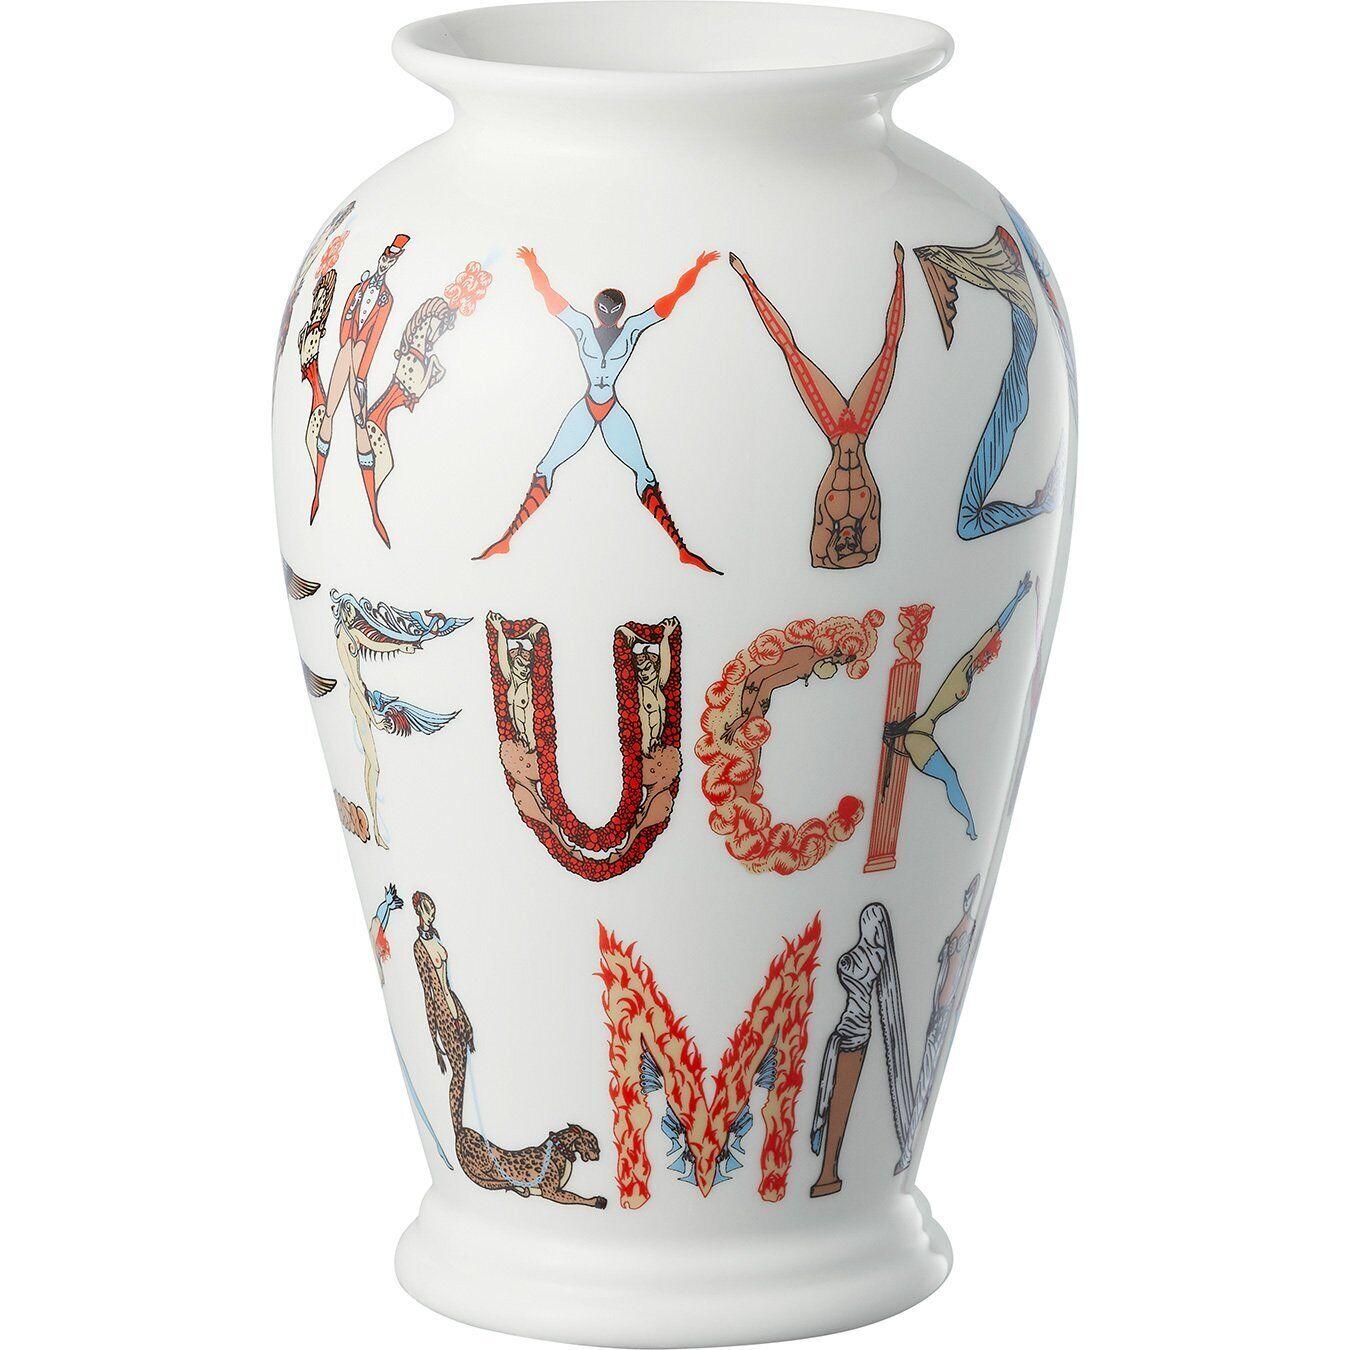 ABC "Fuck" Discontinued Ceramic Circus Vase Limited Release from 2018 - Sculpture by Supreme